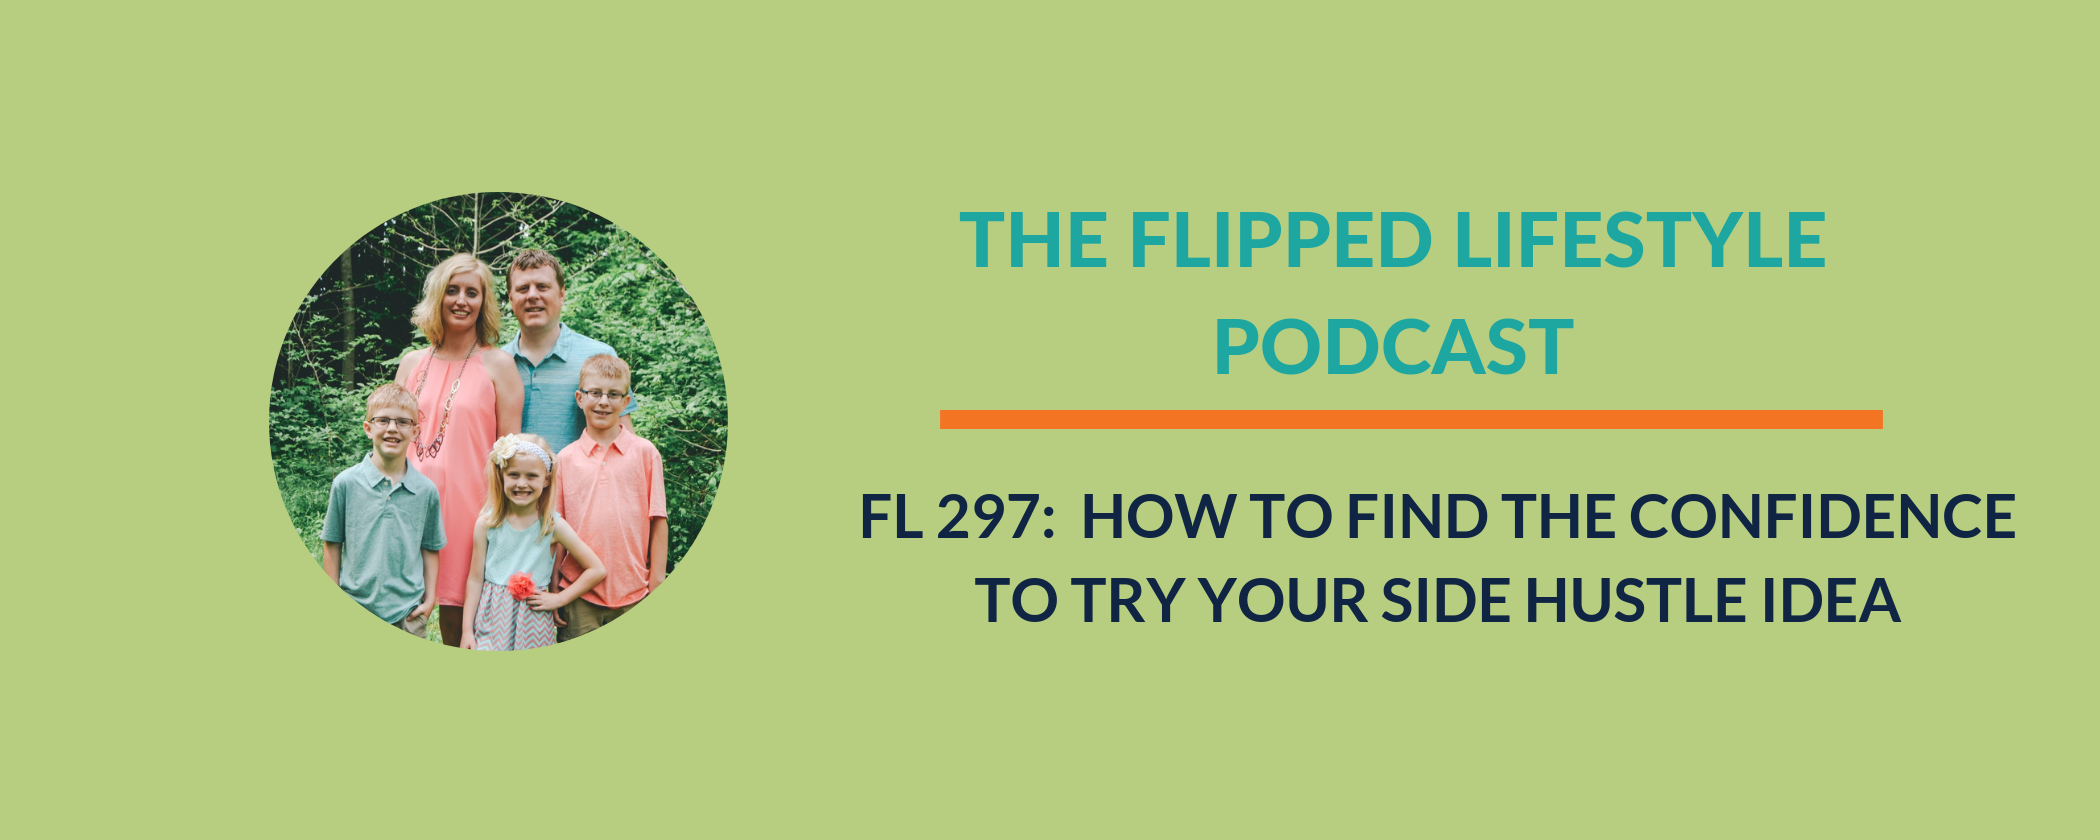 EARLY PODCAST: FL 297 – How to Find the Confidence to Try Your Side Hustle Idea